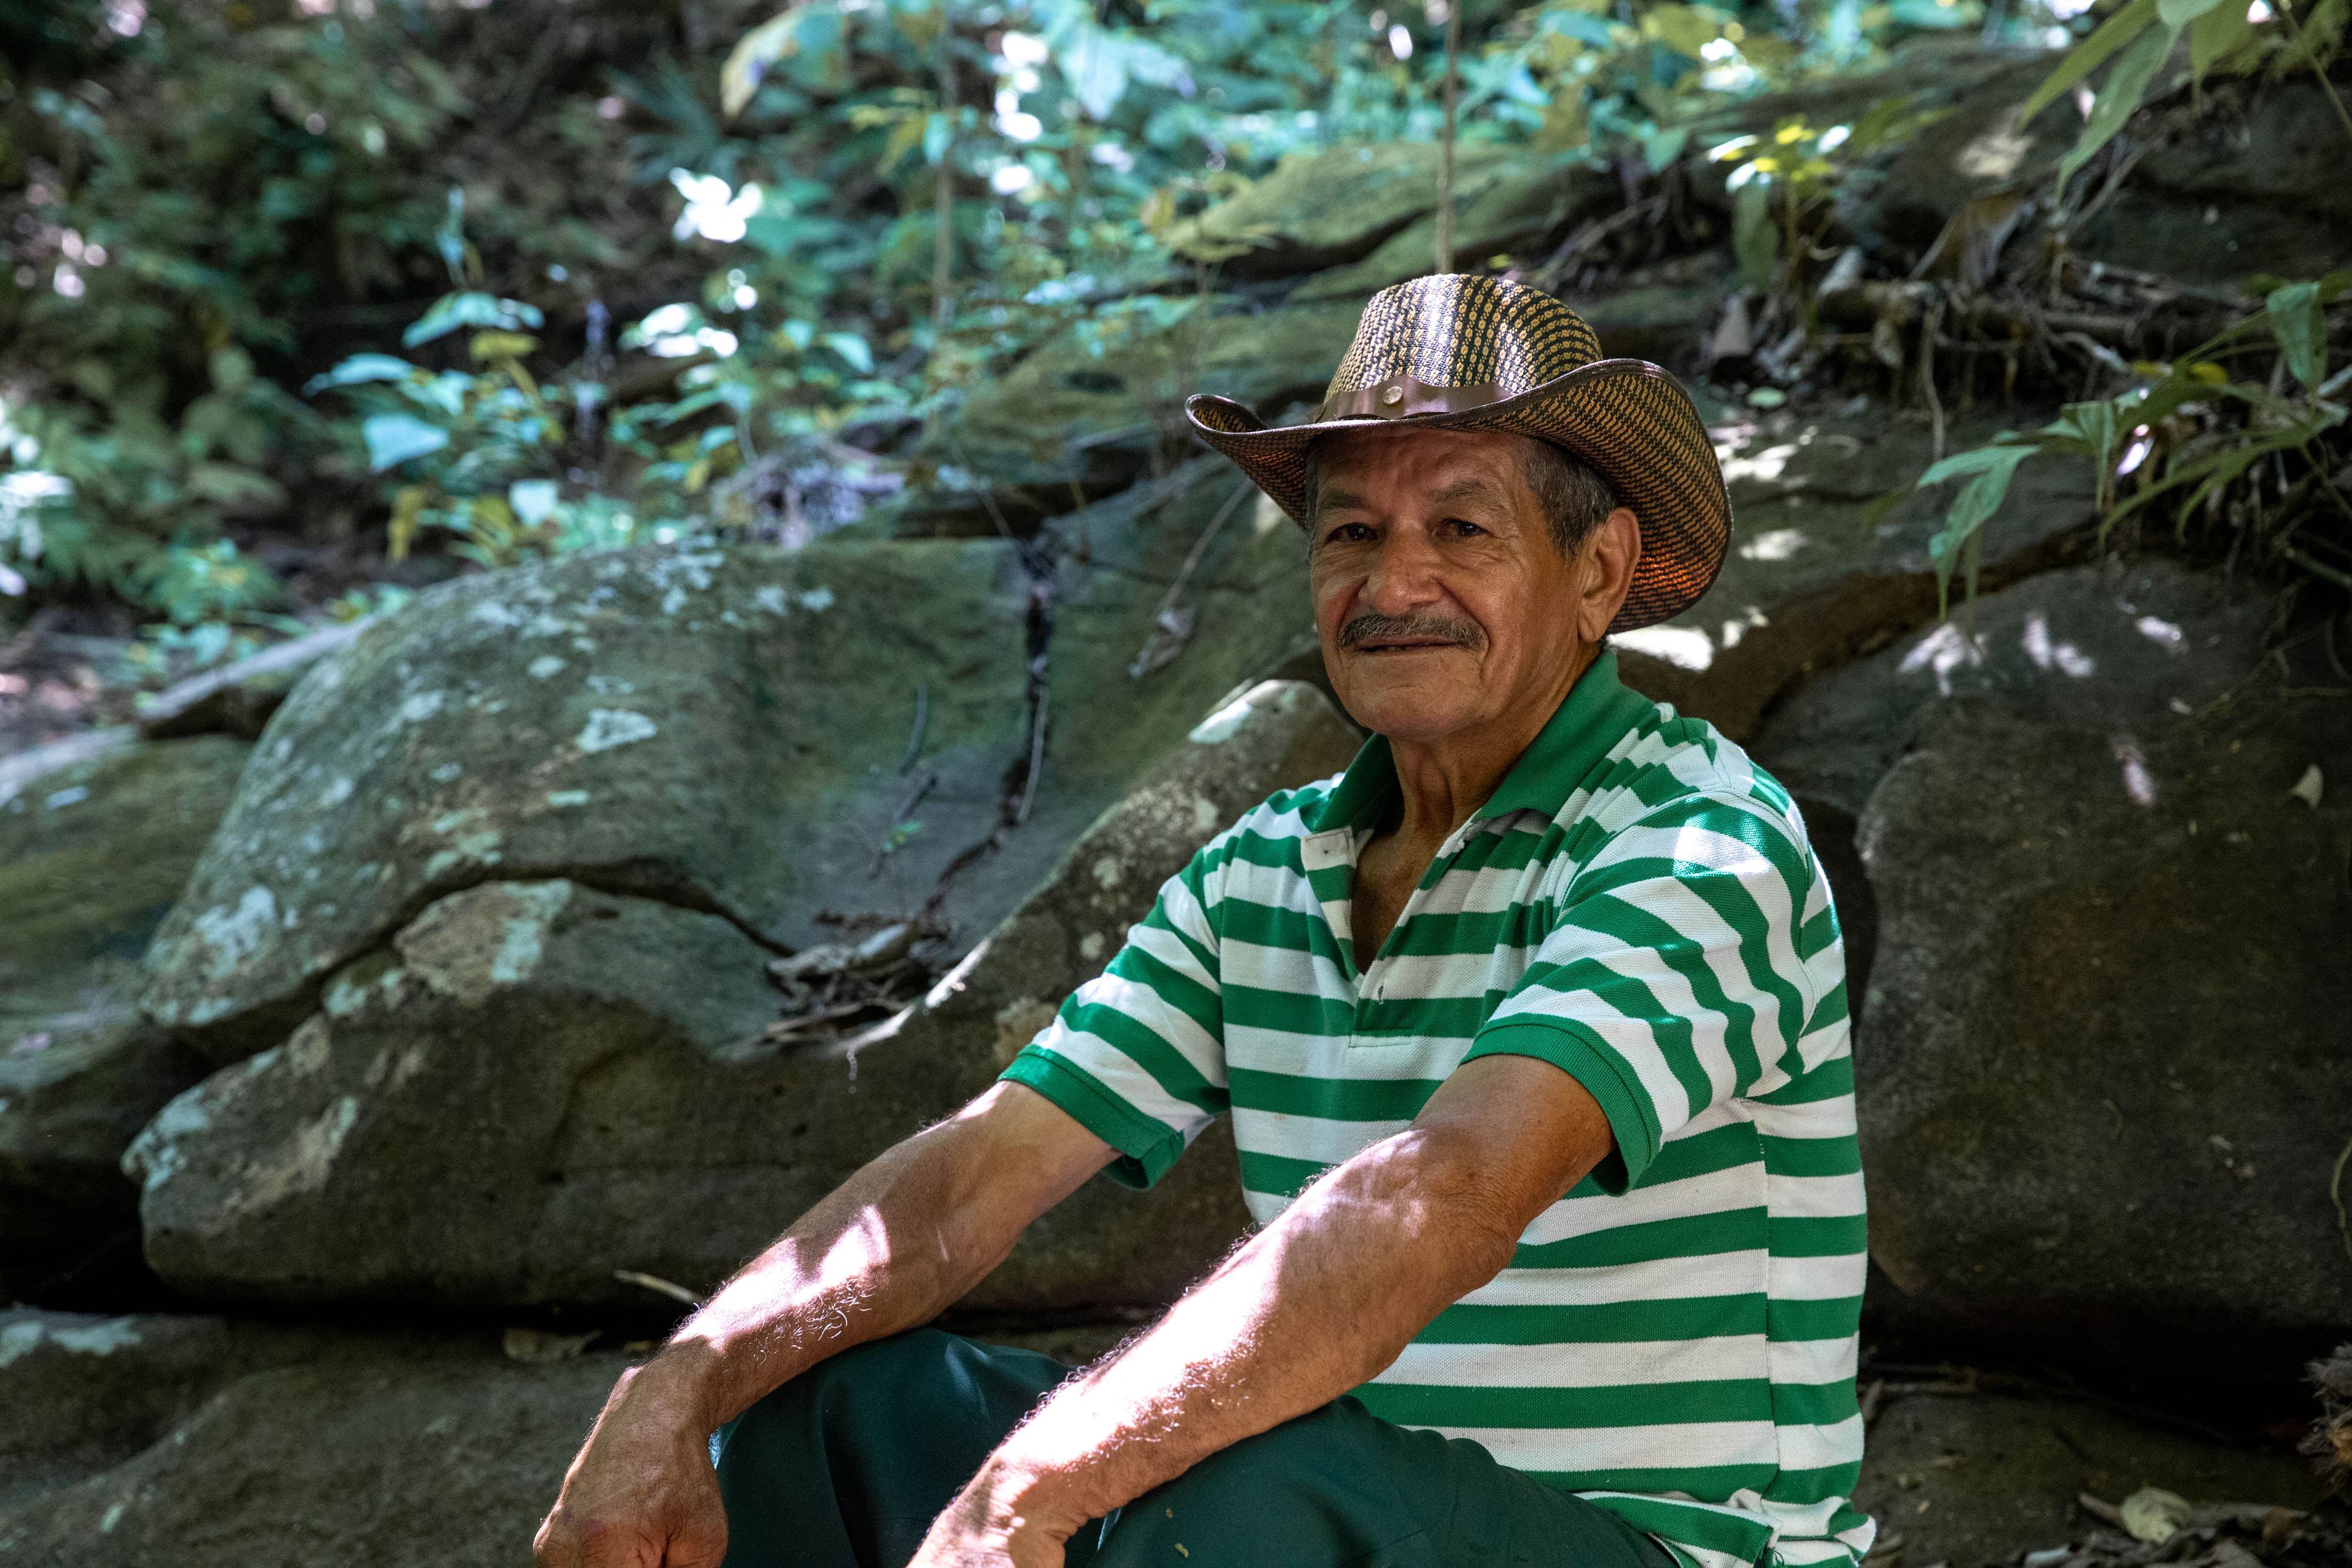 Eduardo Rodríguez poses for a portrait in a lush, shady spot next to a clear stream with a small waterfall that the community refers to as “Eden” for its paradisiacal qualities.